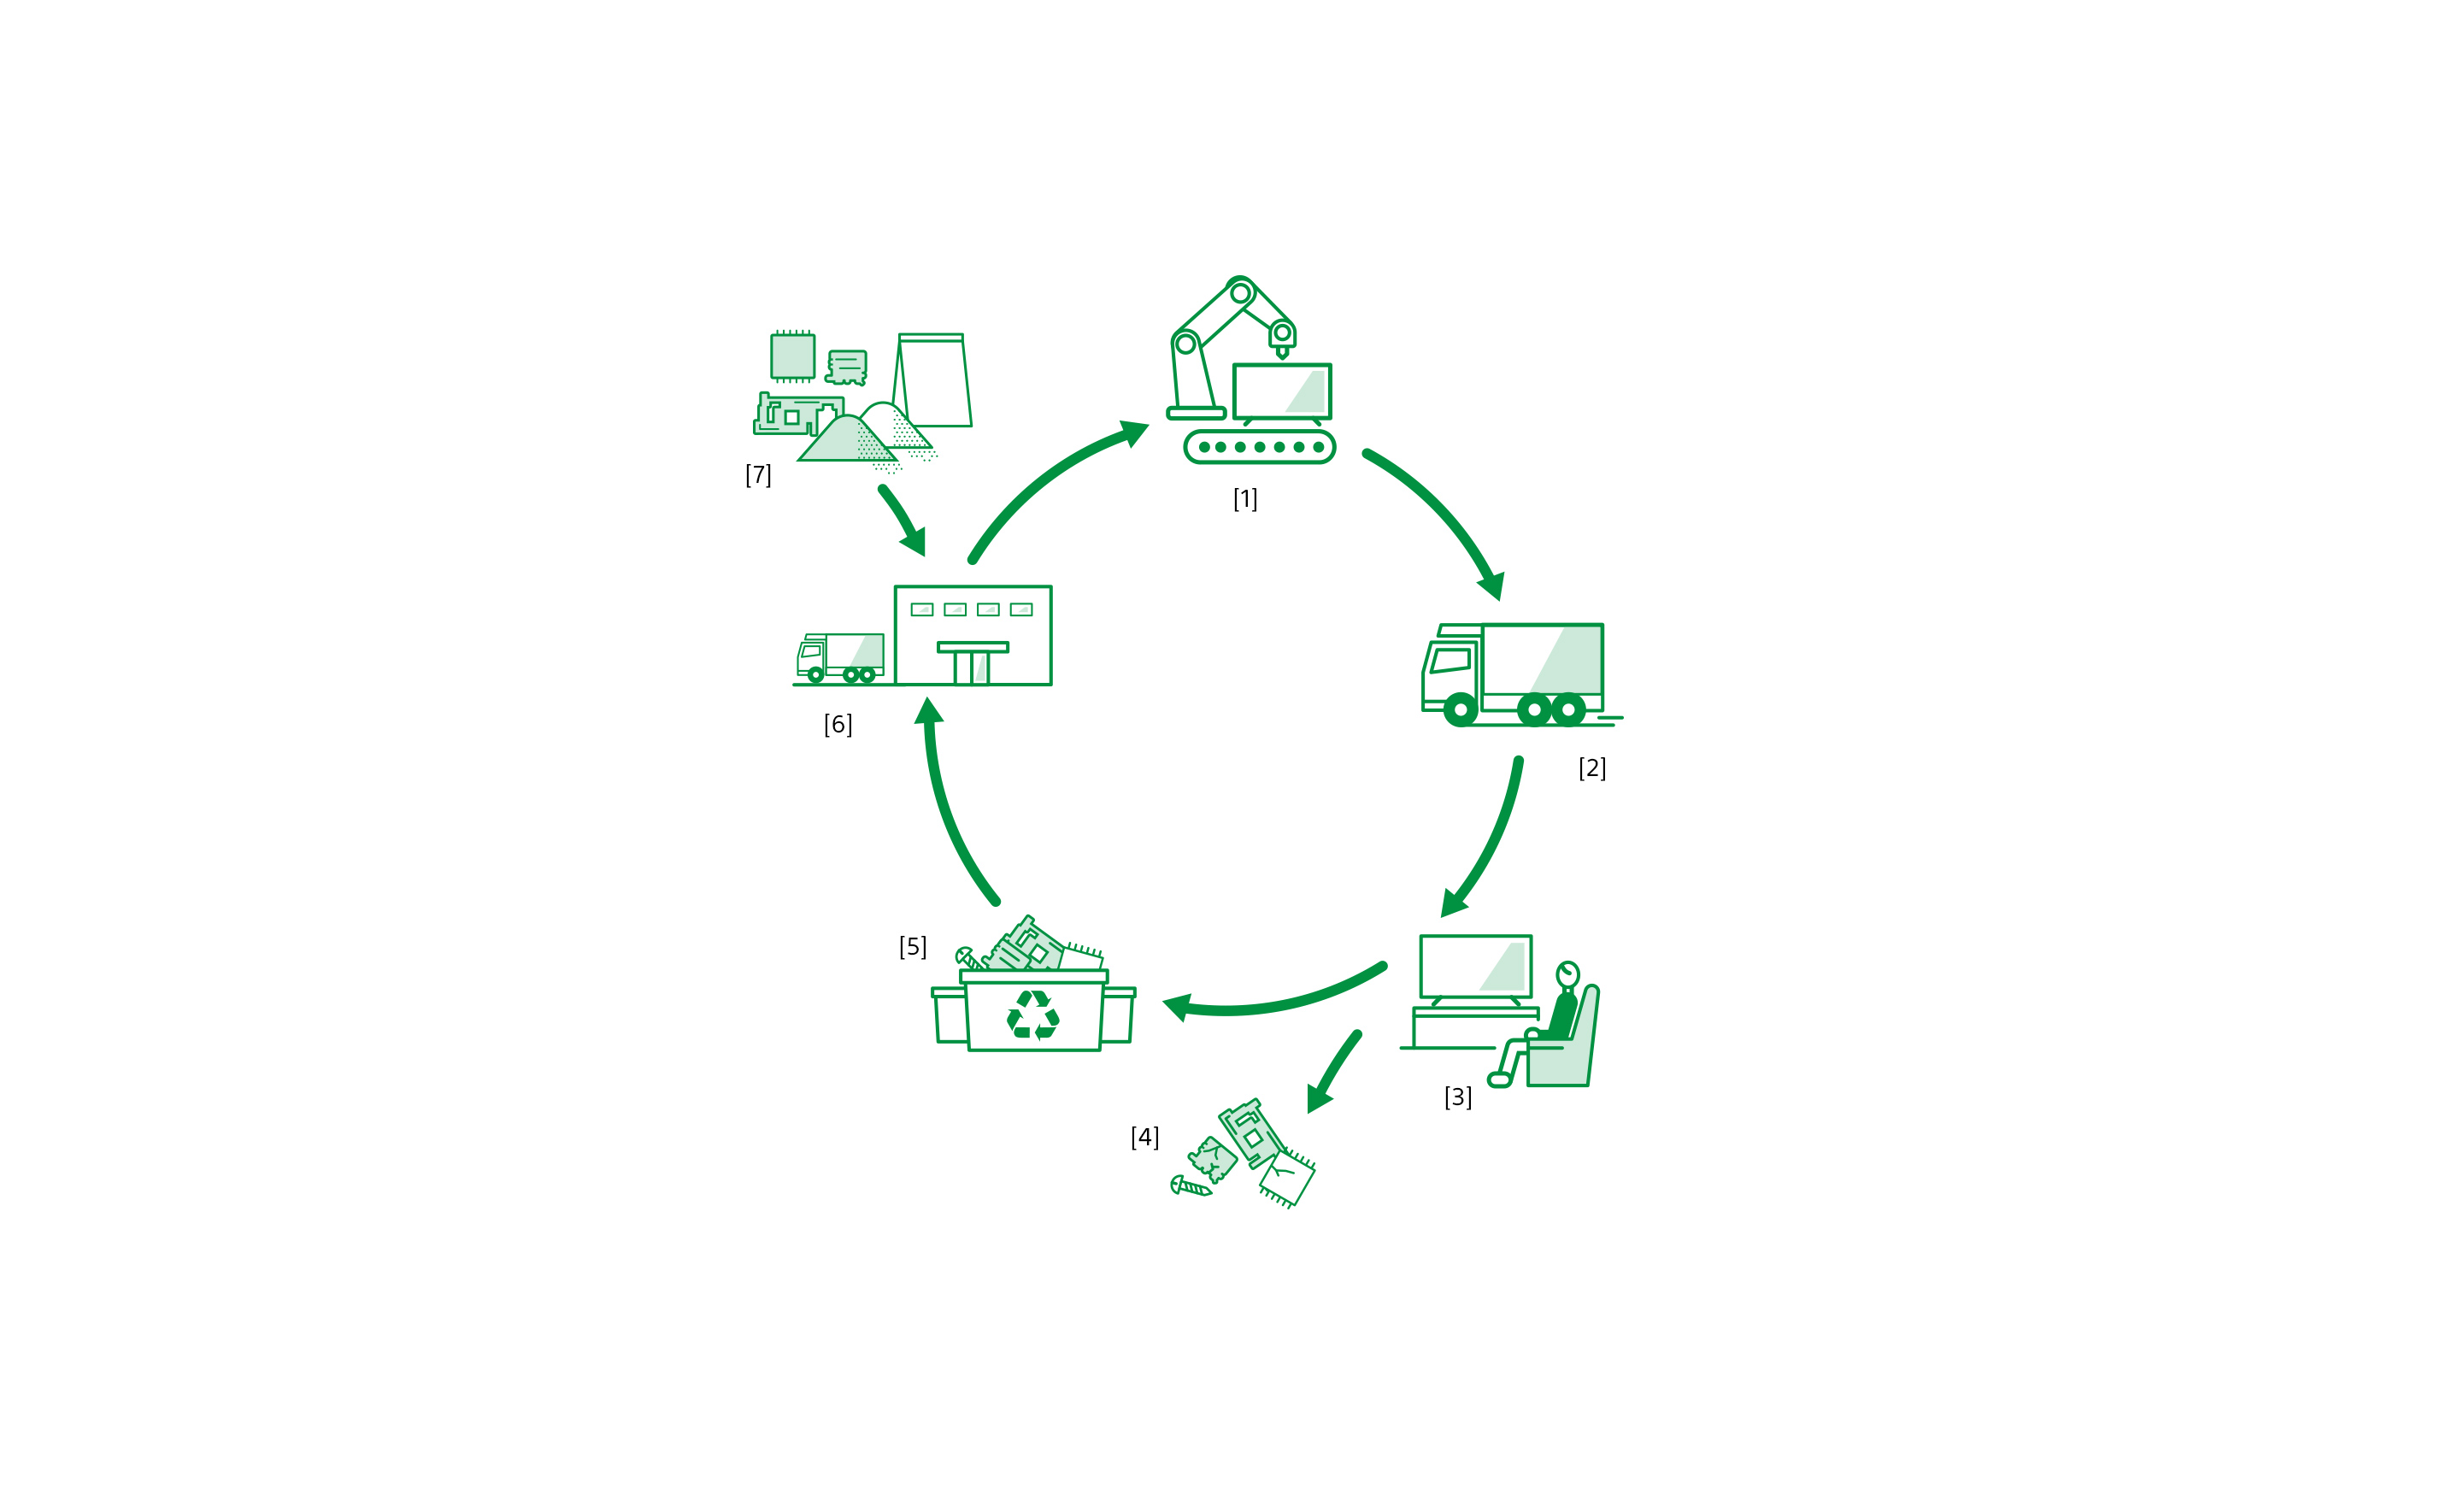 Diagram showing life cycle of a product from manufacturing to  recycling material, with labels: [1] Manufacturing of products at factory sites [2] Logistics [3] Use of products by customers [4] Resource extraction and disposal [5] Recycling sites [6] Manufacturing of parts by suppliers [7] Resource extraction